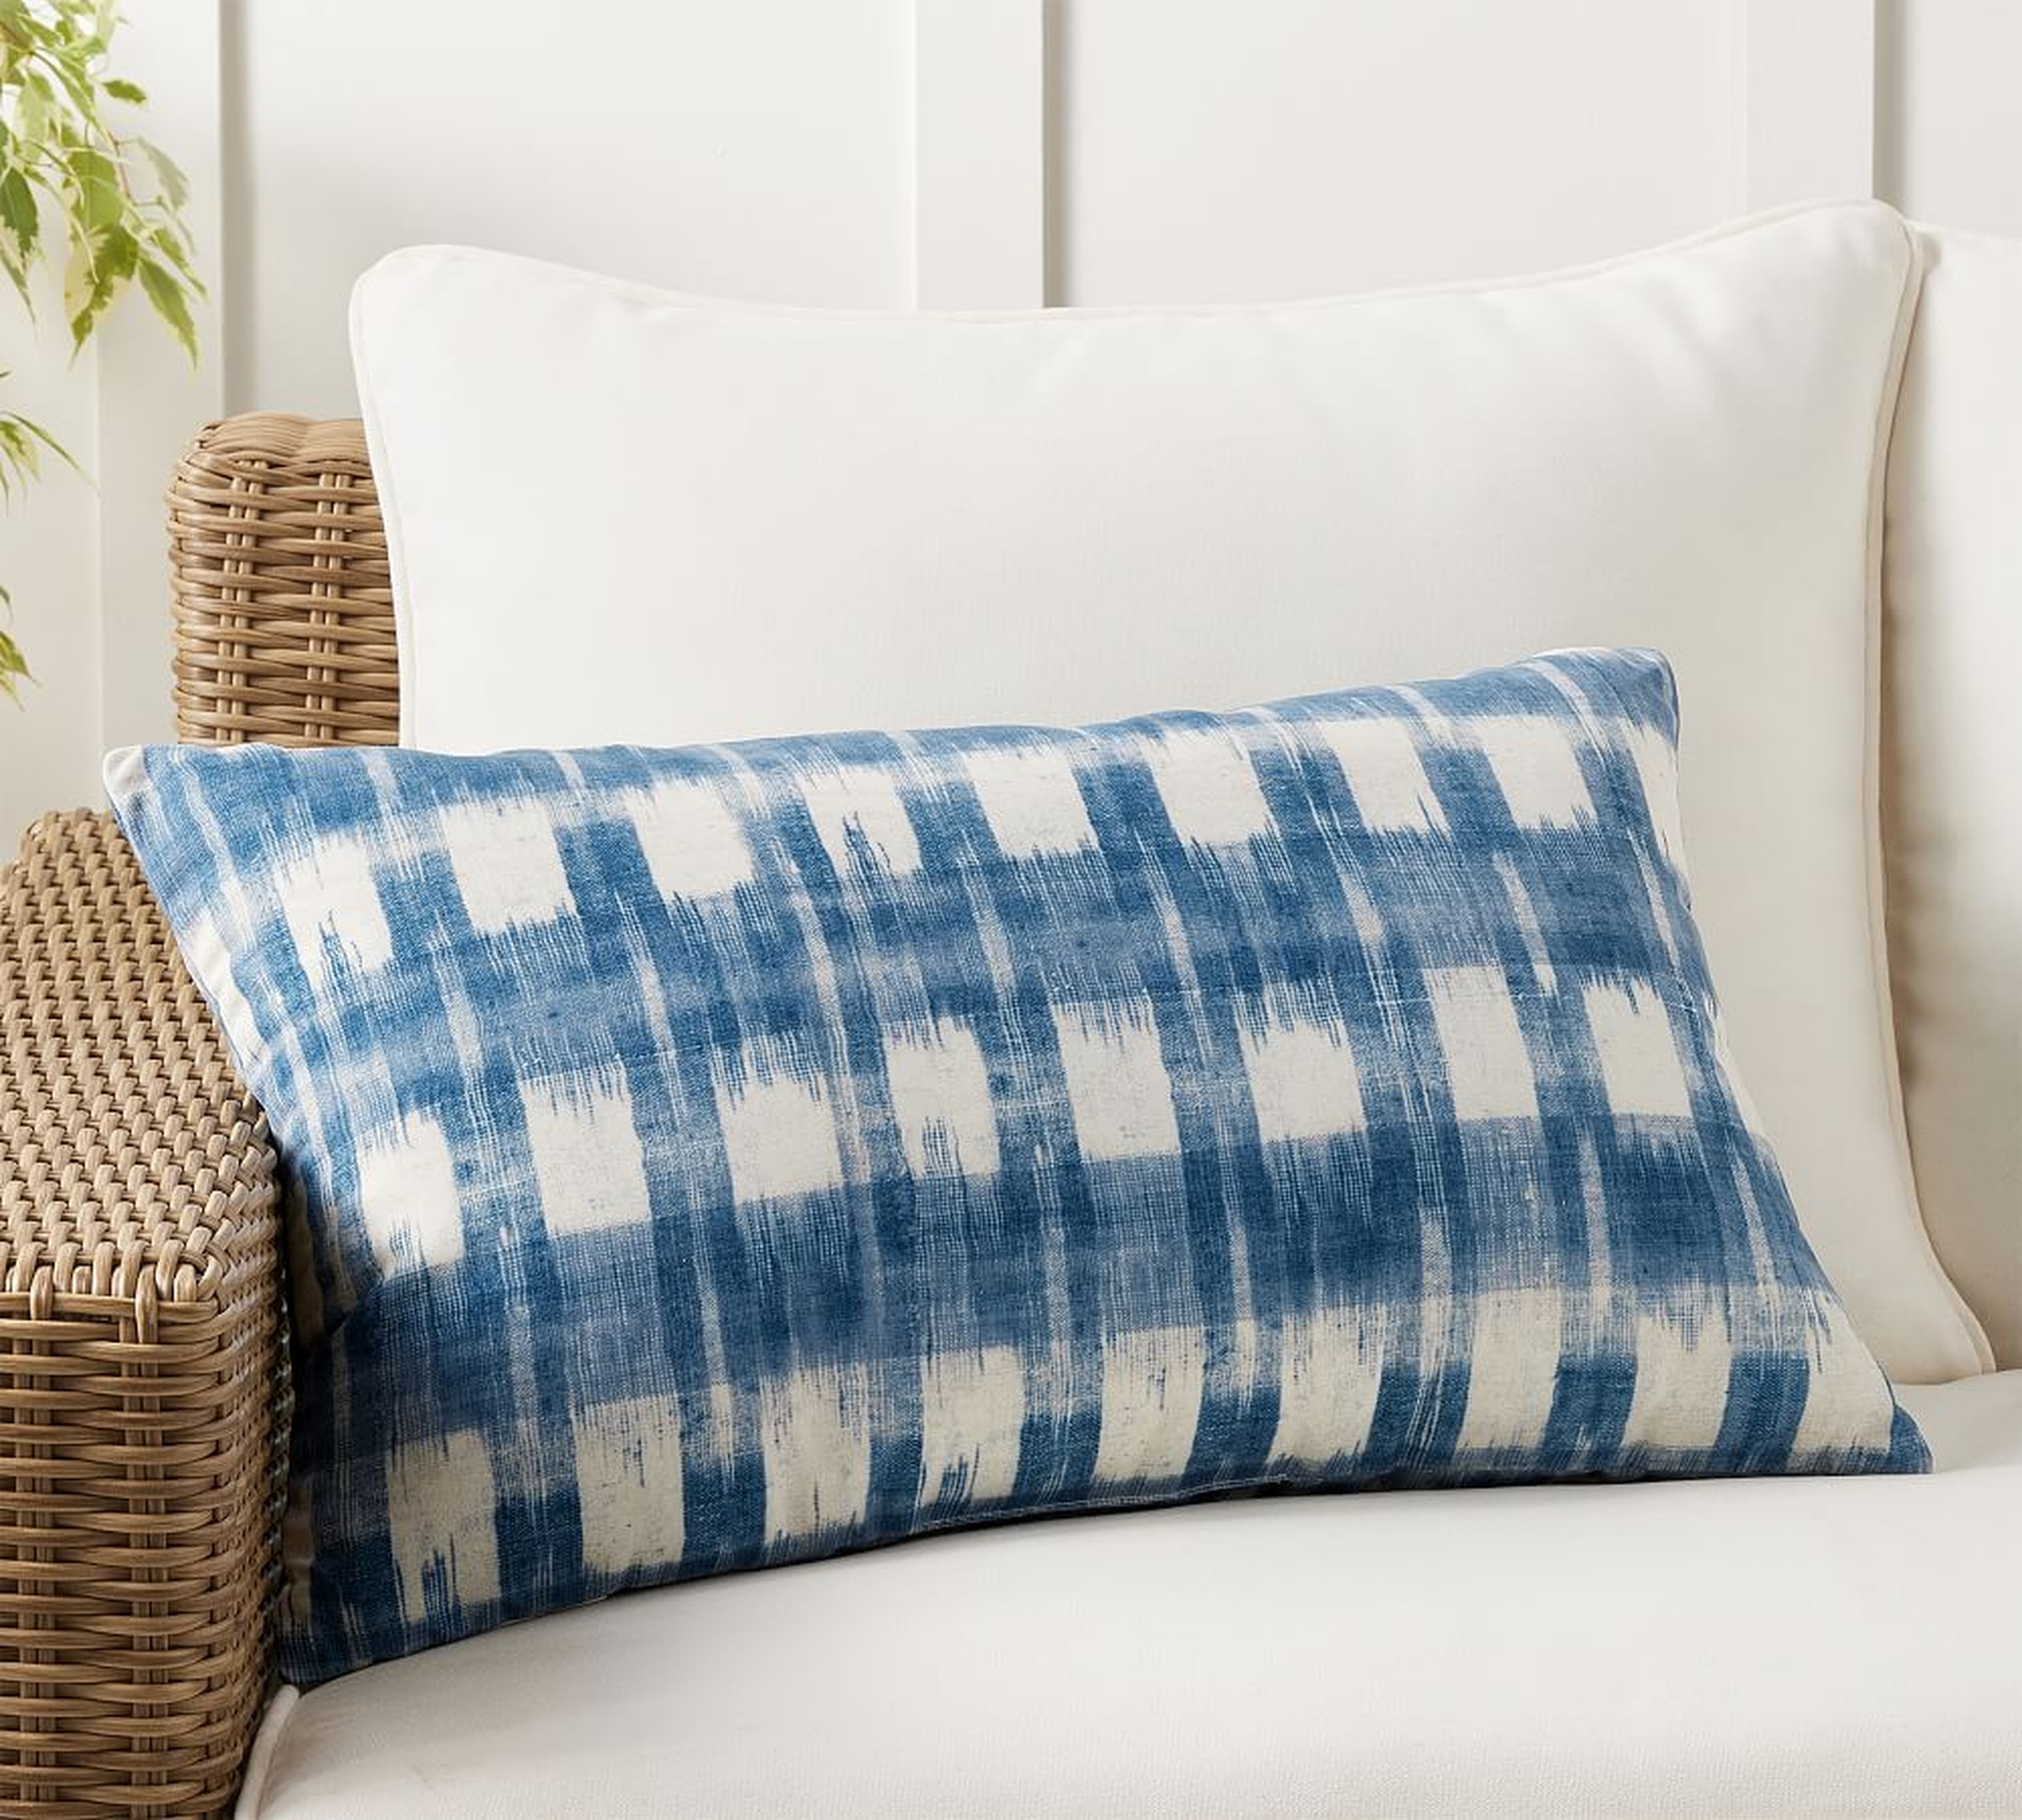 Celyn Printed Indoor/Outdoor Pillow, 16" x 26", Blue Multi - Pottery Barn